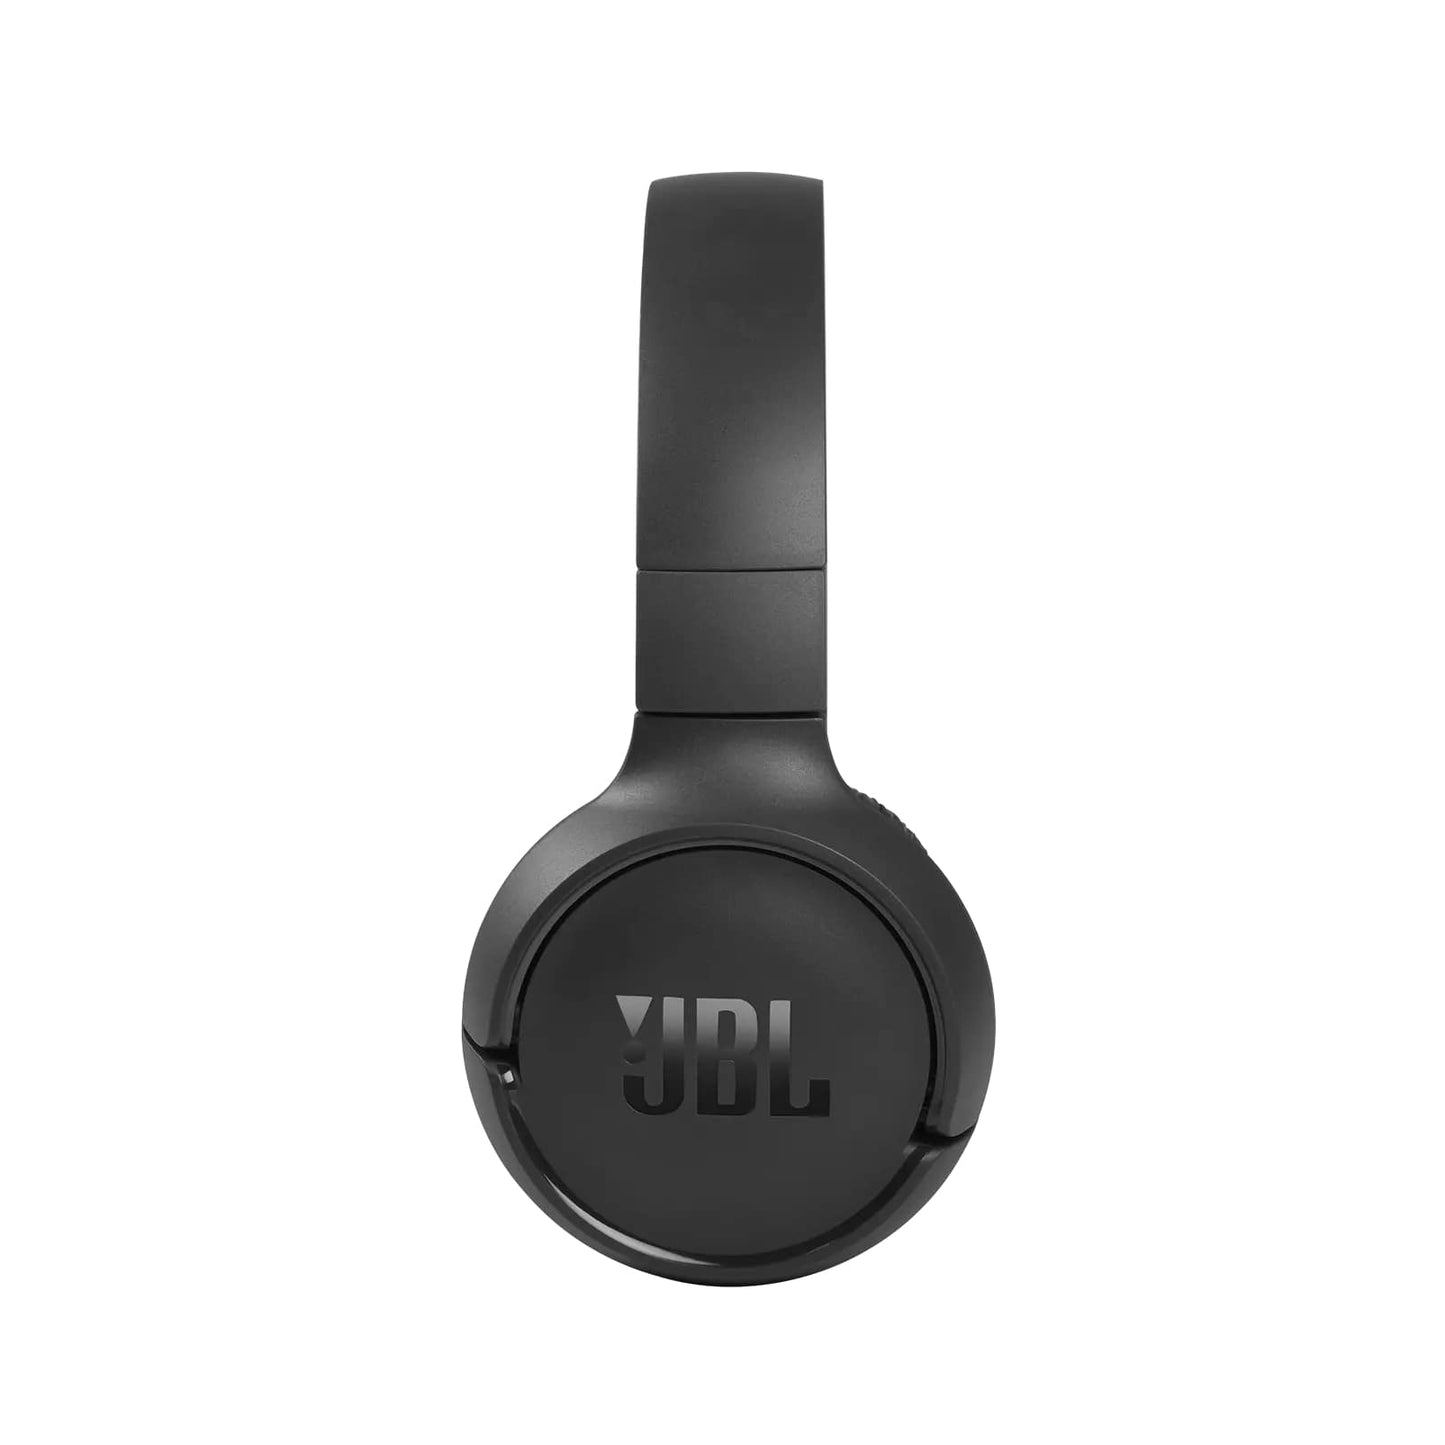 JBL Tune 510BT Pure Bass Sound Wireless On-Ear Headphones with up to 40H Battery with Siri and Google Assistant Support Feature (BLACK, BLUE, WHITE)